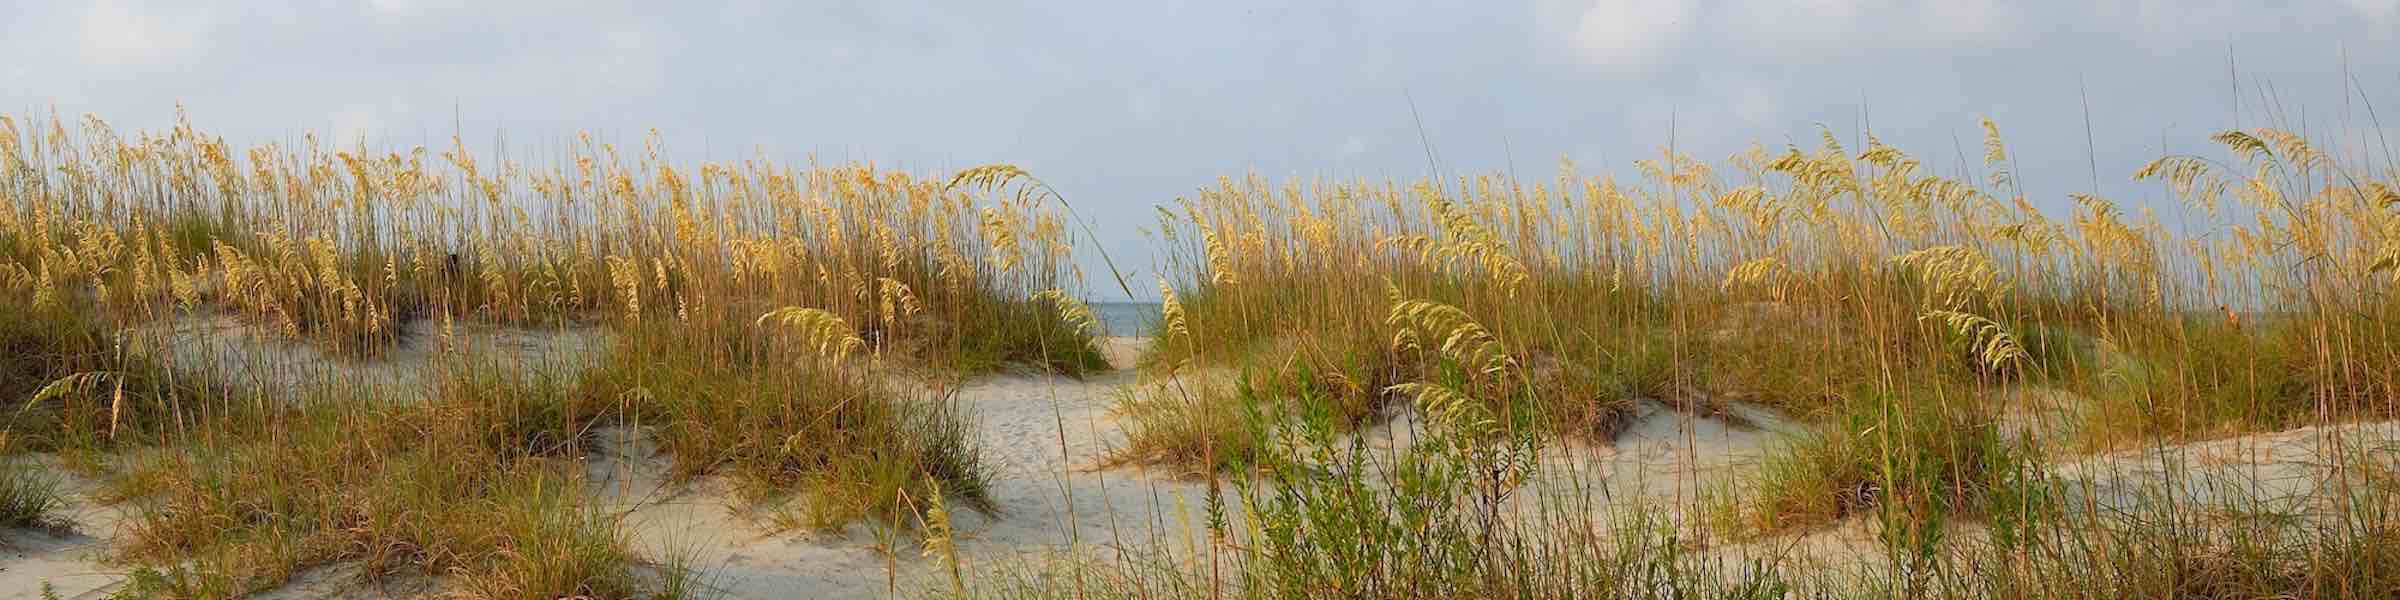 Dunes and grasses bordering on a beach.